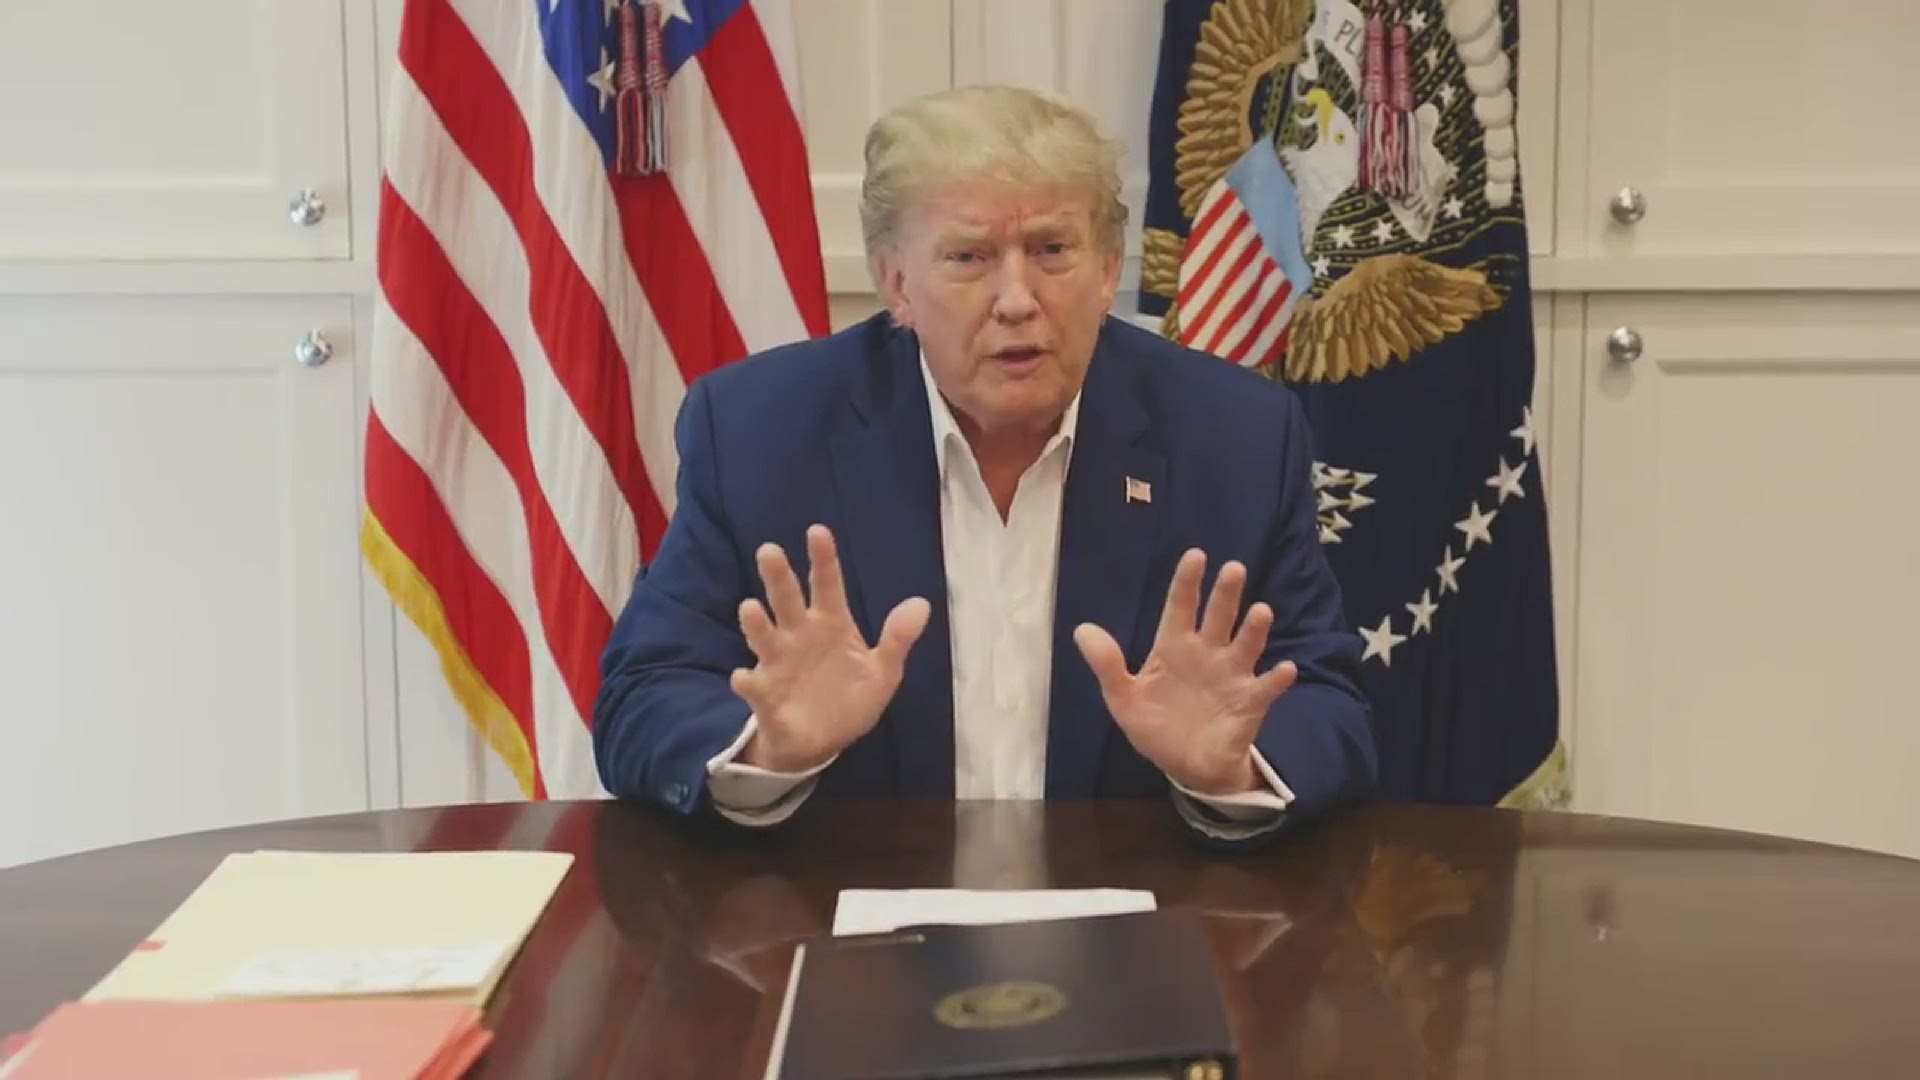 President Donald Trump released a video message Saturday evening while he remains hospitalized at the Walter Reed Medical Center.